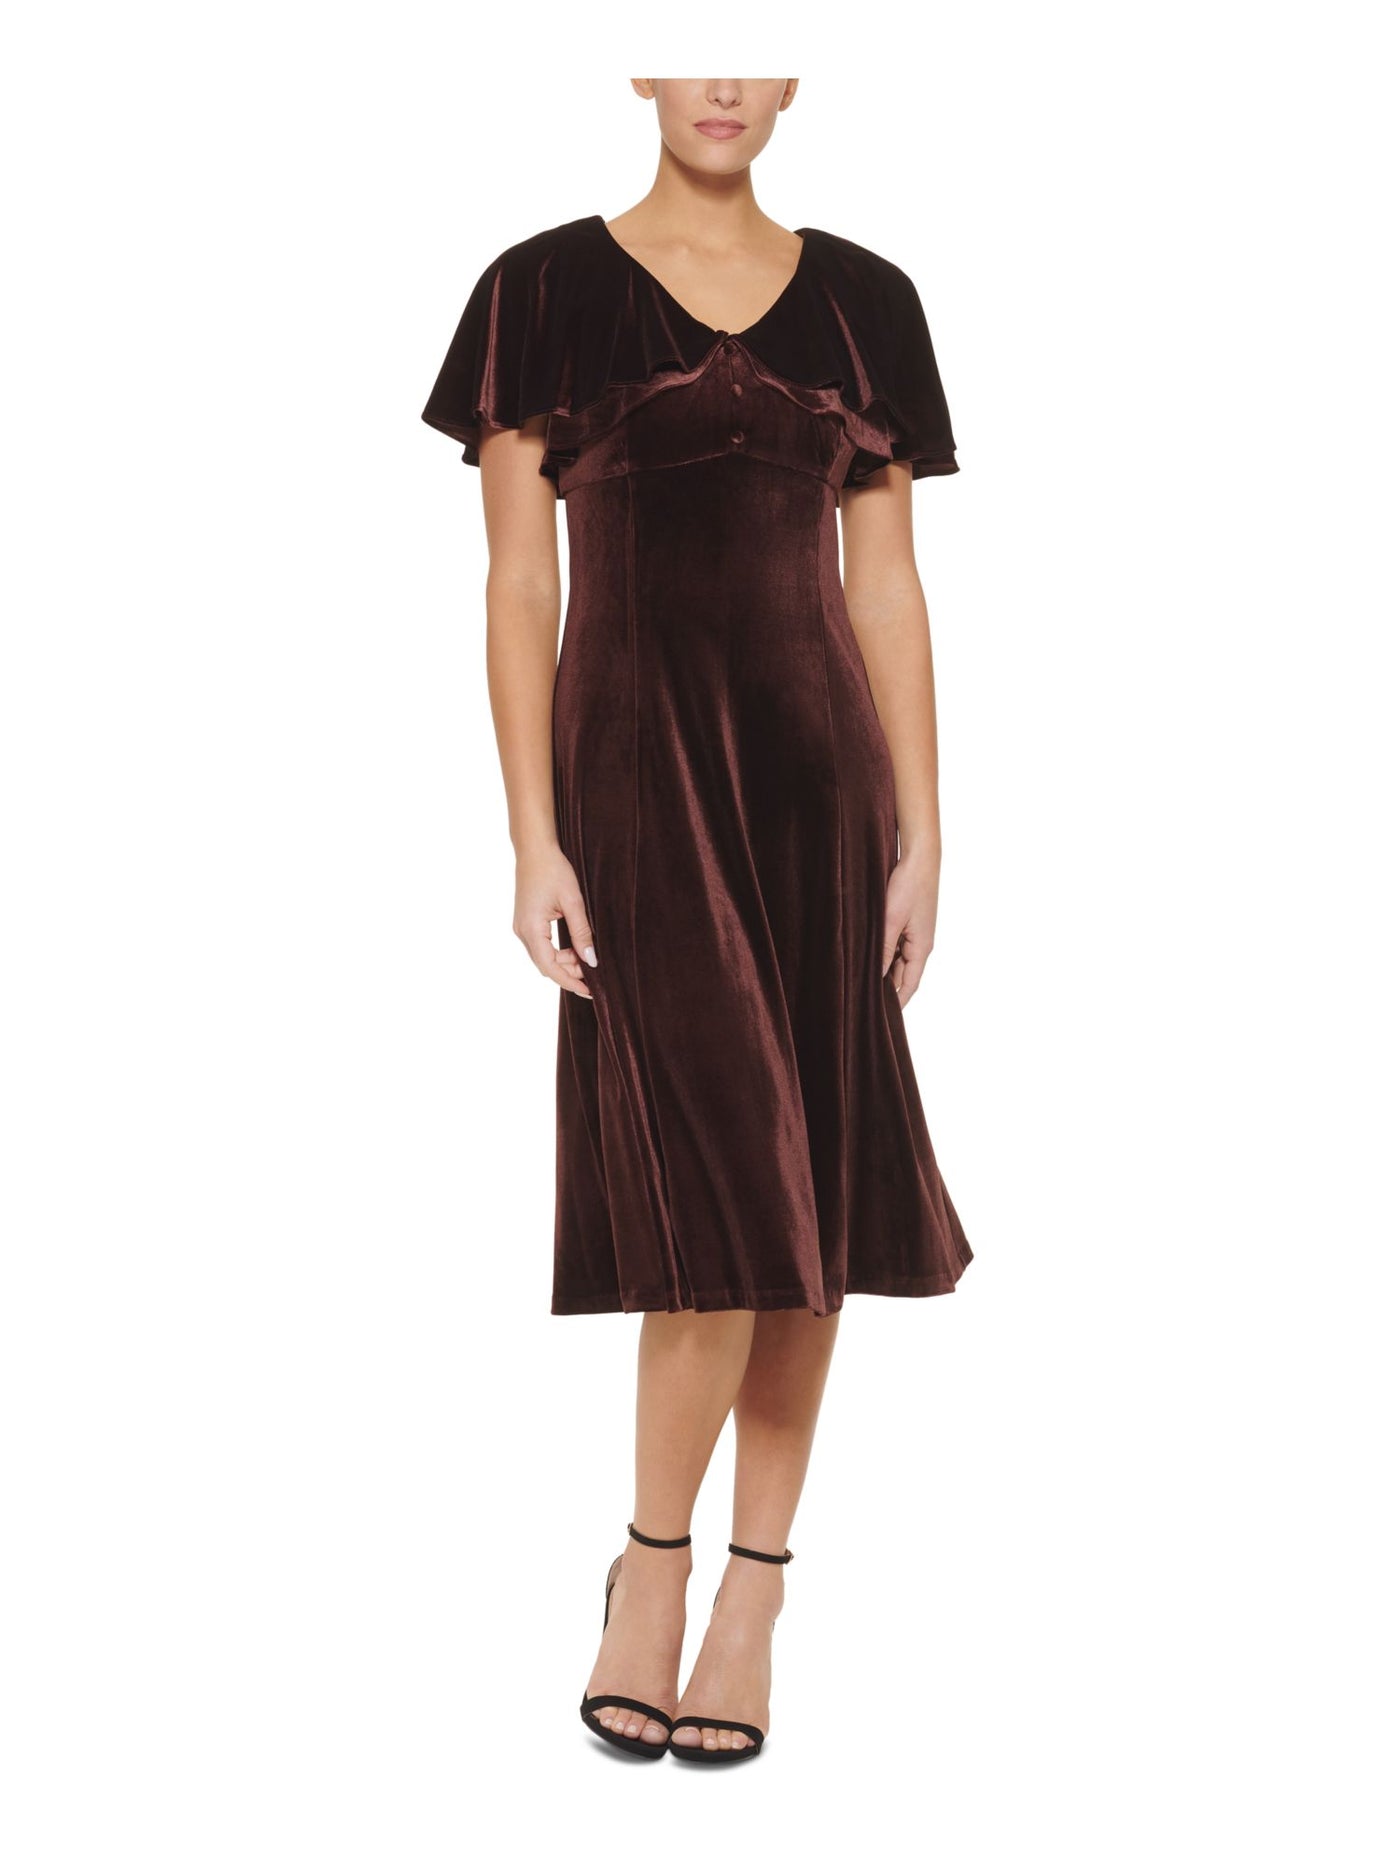 DKNY Womens Brown Zippered Unlined Cape Silhouette Sleeveless V Neck Midi Cocktail Shift Dress 4